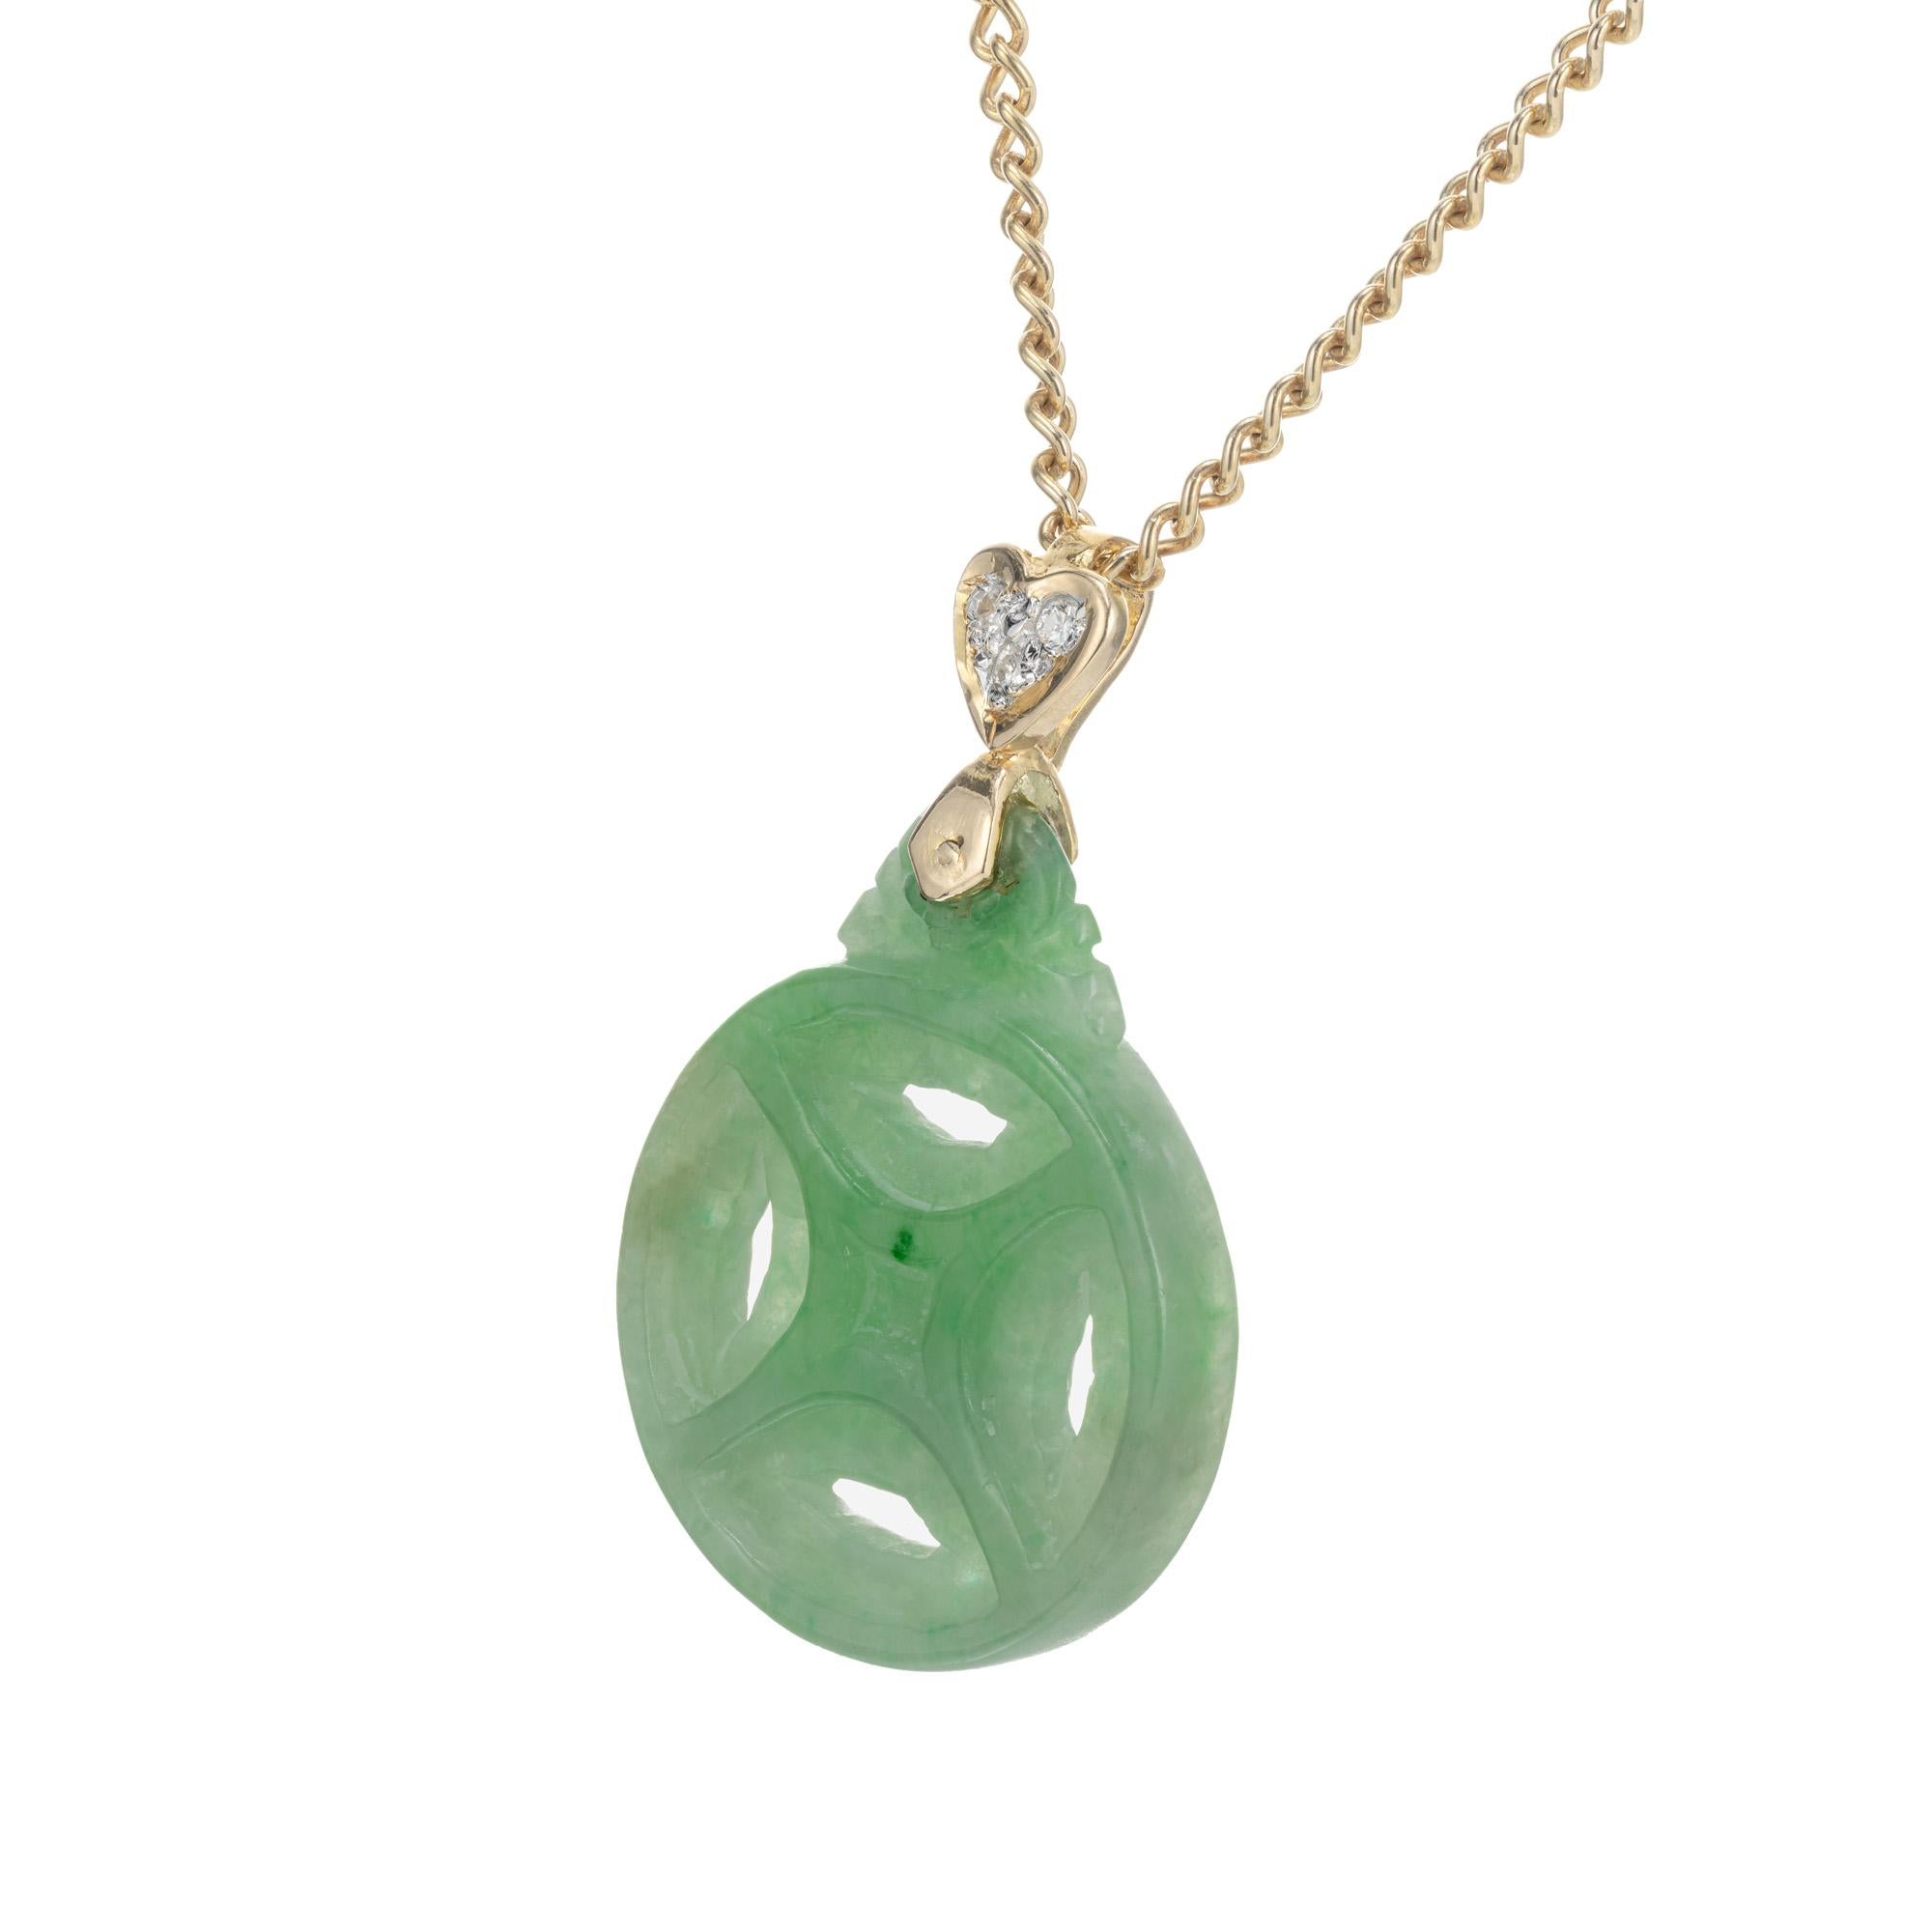 Jadeite Jade and diamond pendant. GIA certified Carved round natural color jade, no indications of impregnation, pendant with 3 round diamonds in a heart shaped 18k yellow gold frame. 16 inch 18k yellow gold chain. 

1 round carved jadeite jade